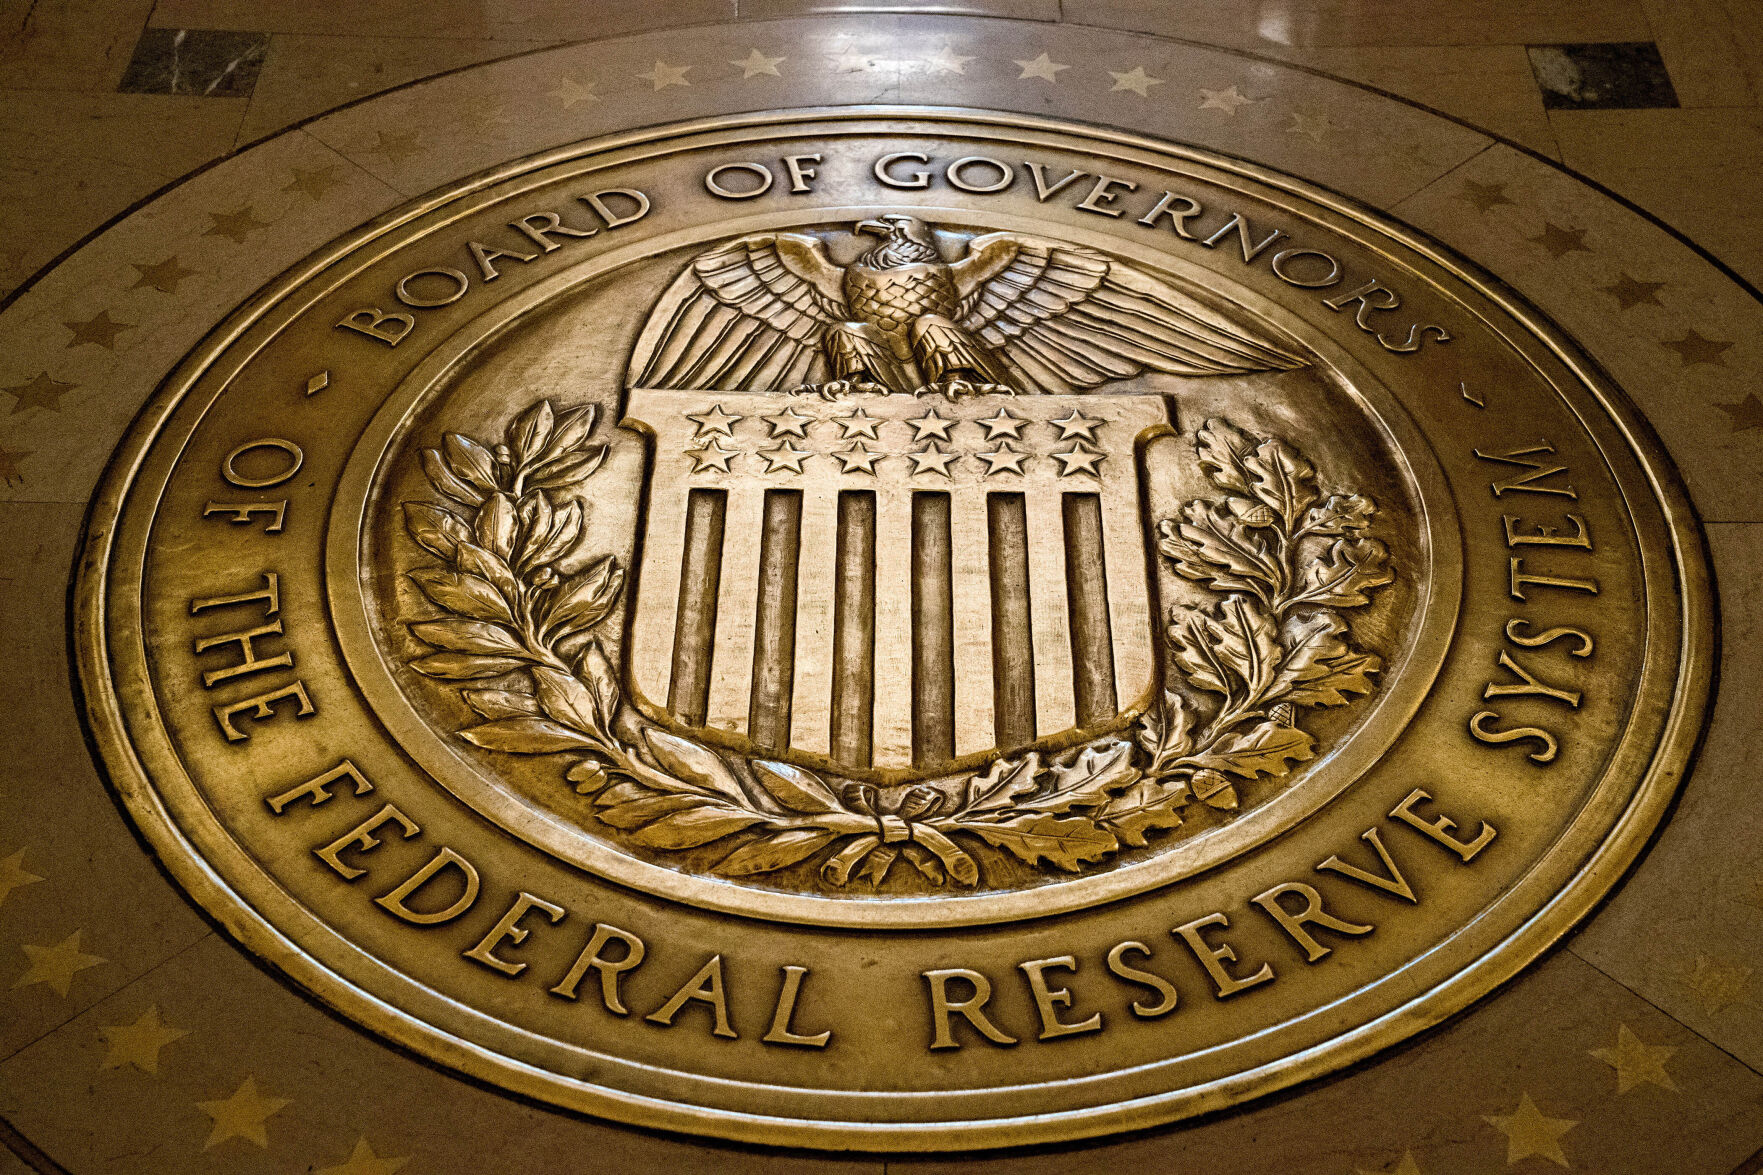 <p>FILE- The seal of the Board of Governors of the United States Federal Reserve System is displayed in the ground at the Marriner S. Eccles Federal Reserve Board Building in Washington, Feb. 5, 2018. Since Federal Reserve officials last met in July, the economy has moved in the direction they hoped to see: Inflation continues to ease, if more slowly than before, while growth remains solid and the job market cools. (AP Photo/Andrew Harnik, File)</p>   PHOTO CREDIT: Andrew Harnik - staff, ASSOCIATED PRESS